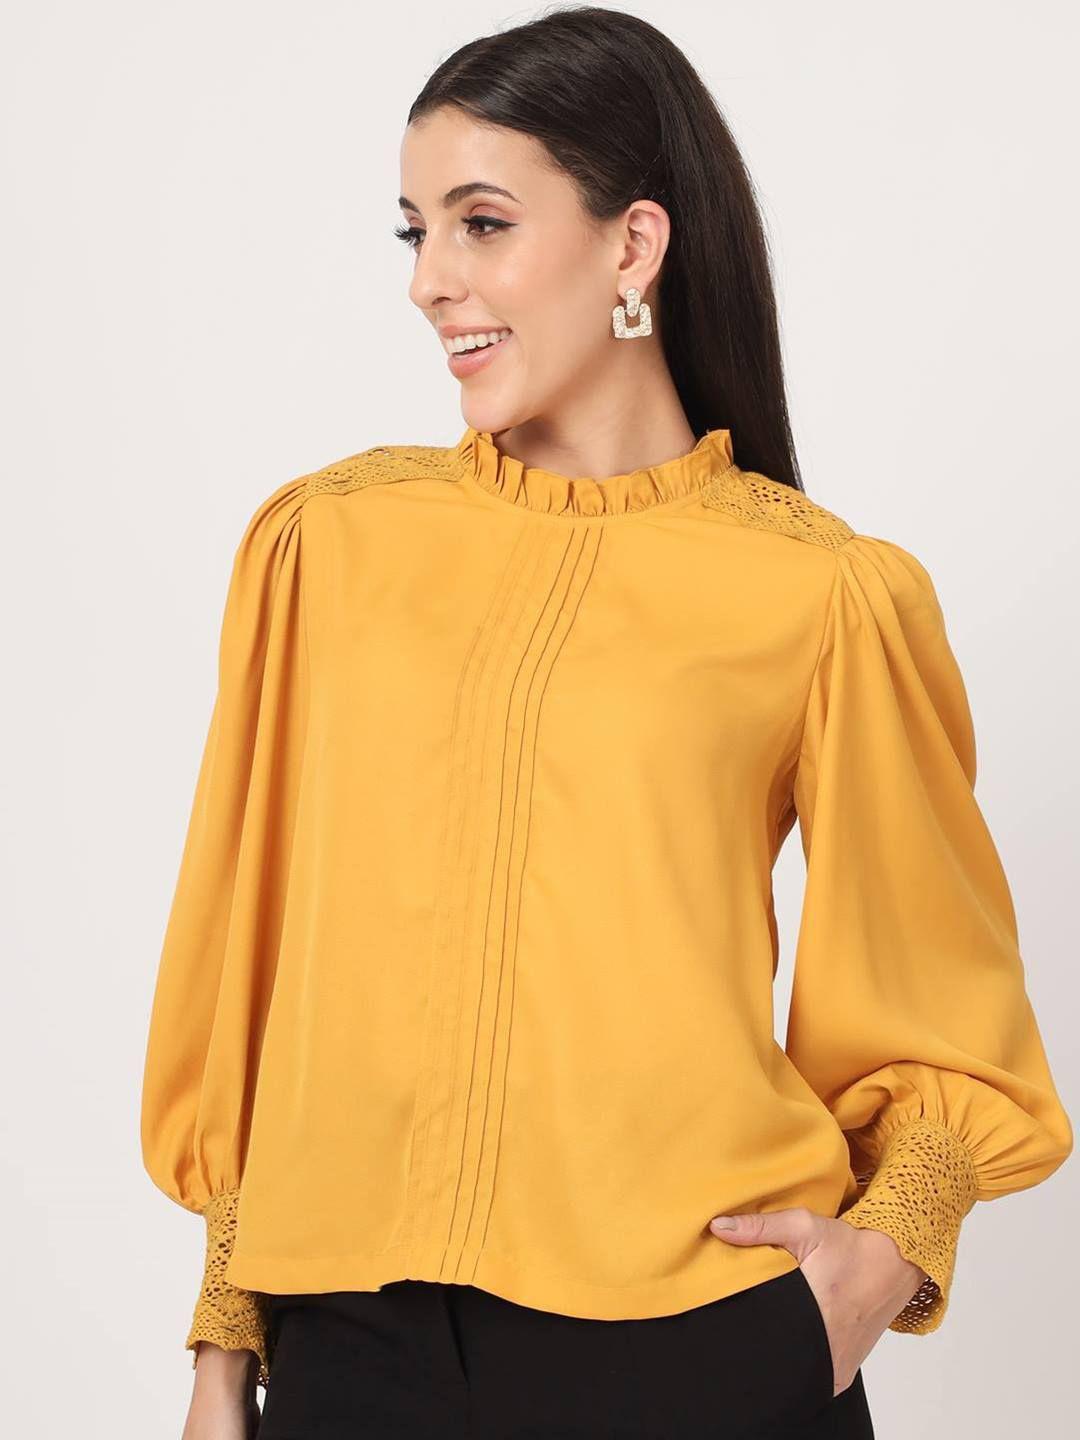 beatnik lace detailed cuffed sleeves high neck top